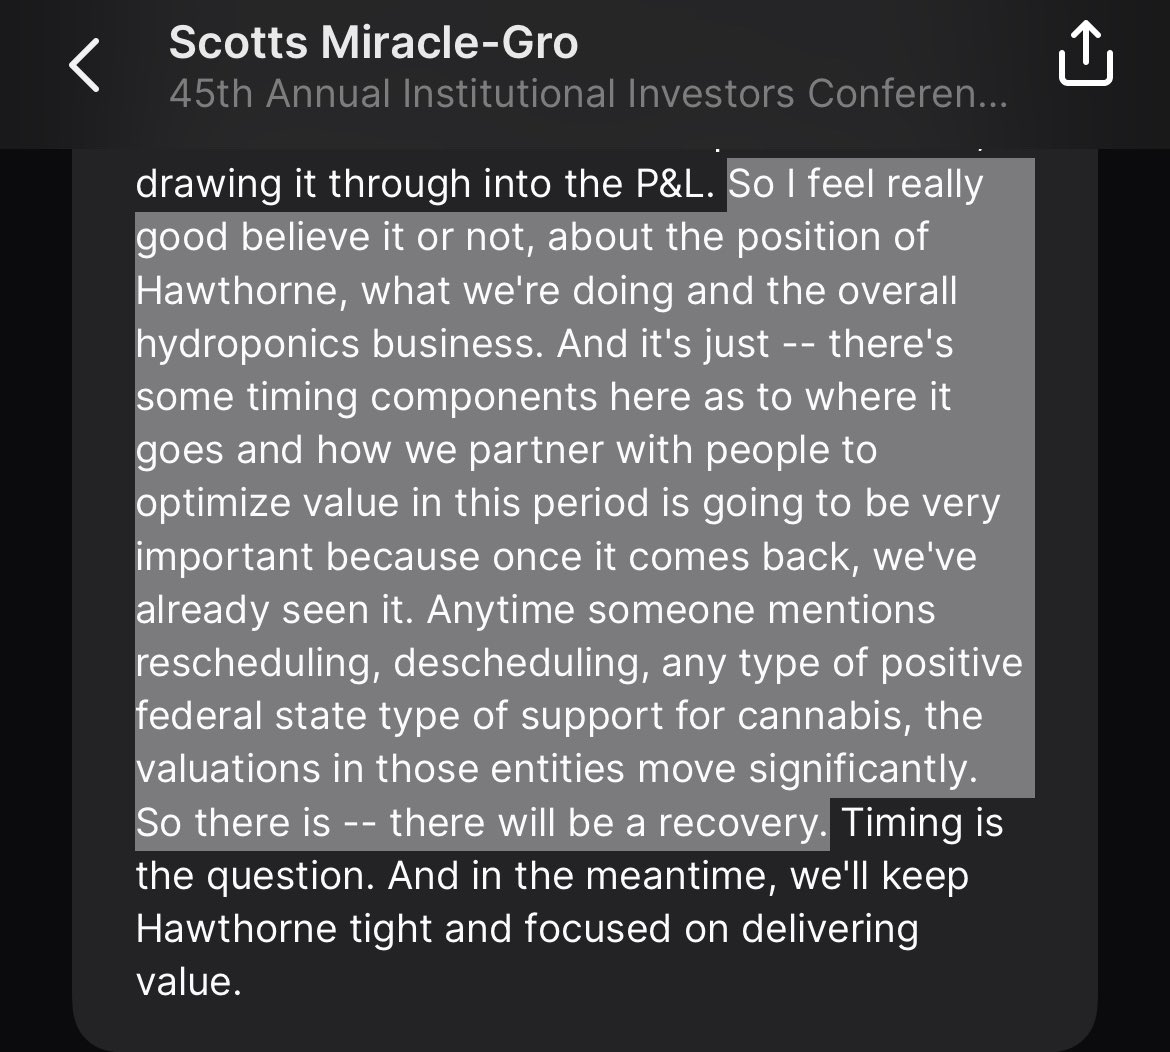 Hawthorne spin-off plans walked back at $SMG. Mgmt warming up to the capex cycle returning in cannabis. cc $HYFM $GRWG